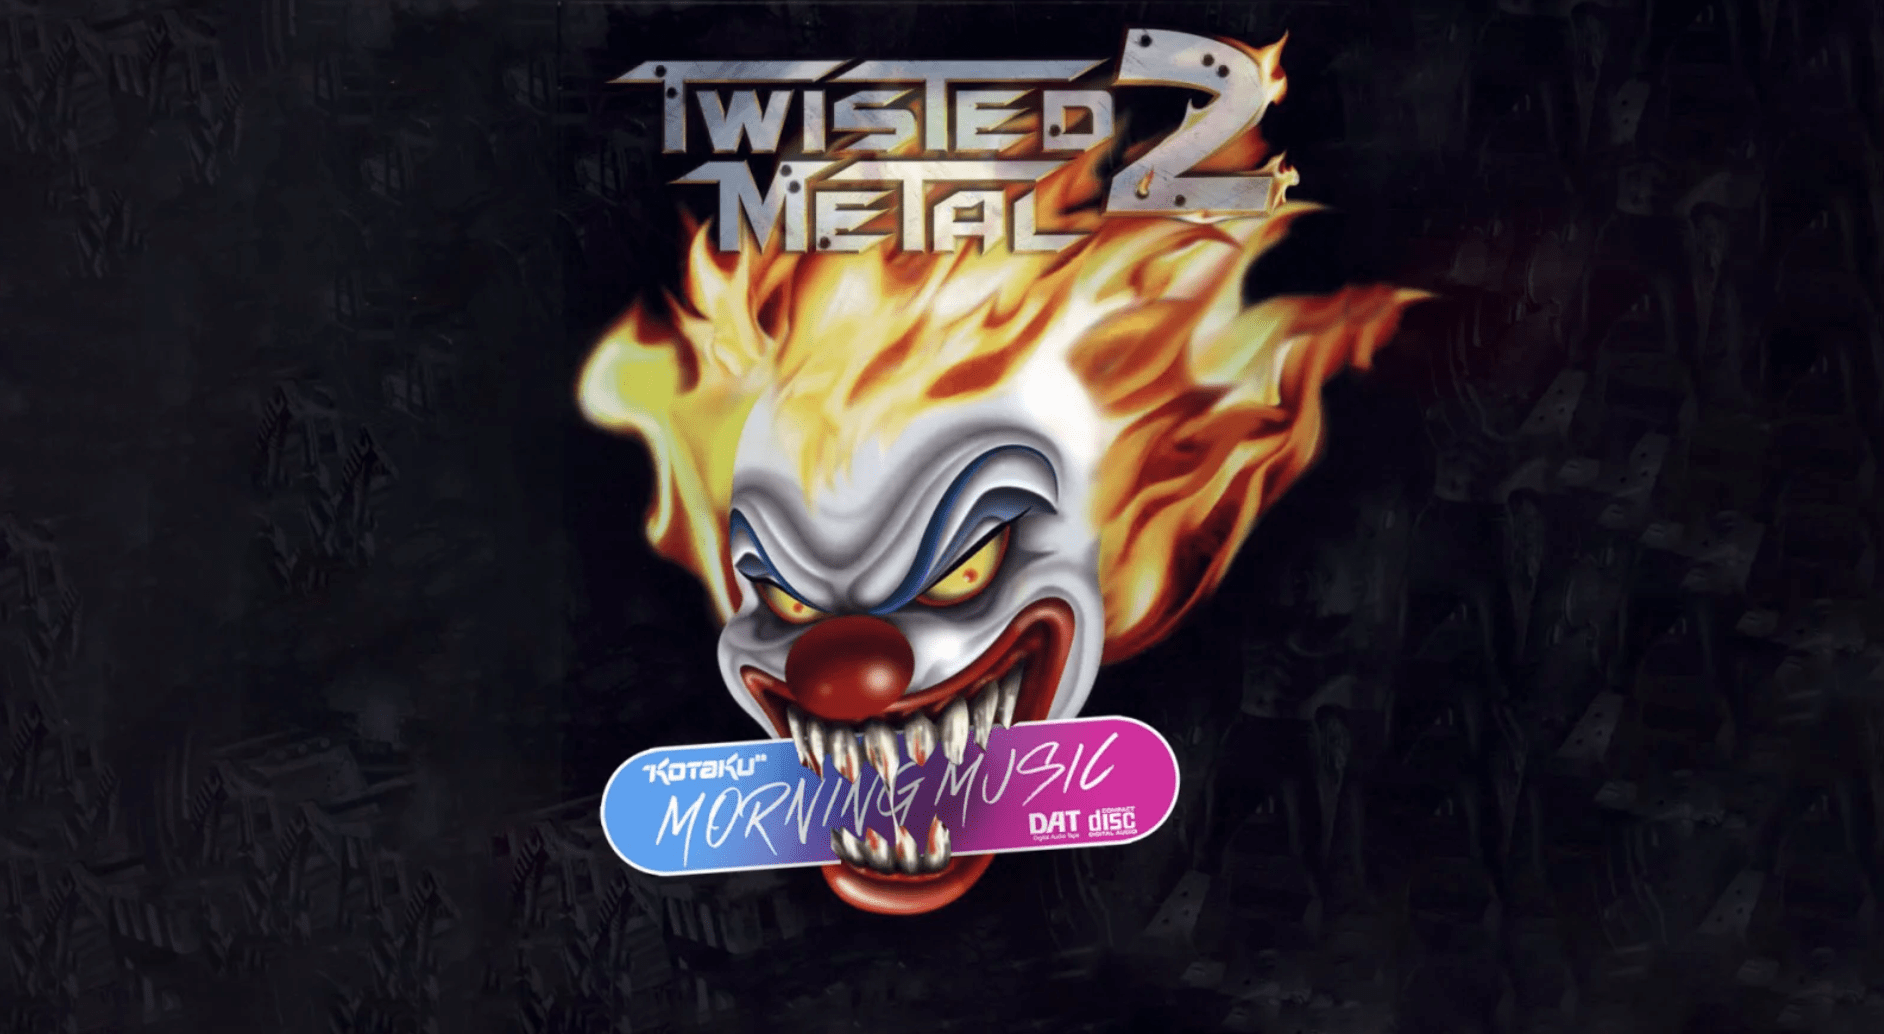 Twisted Metal Similar Games  Playstation, Classic video games, Video game  sales